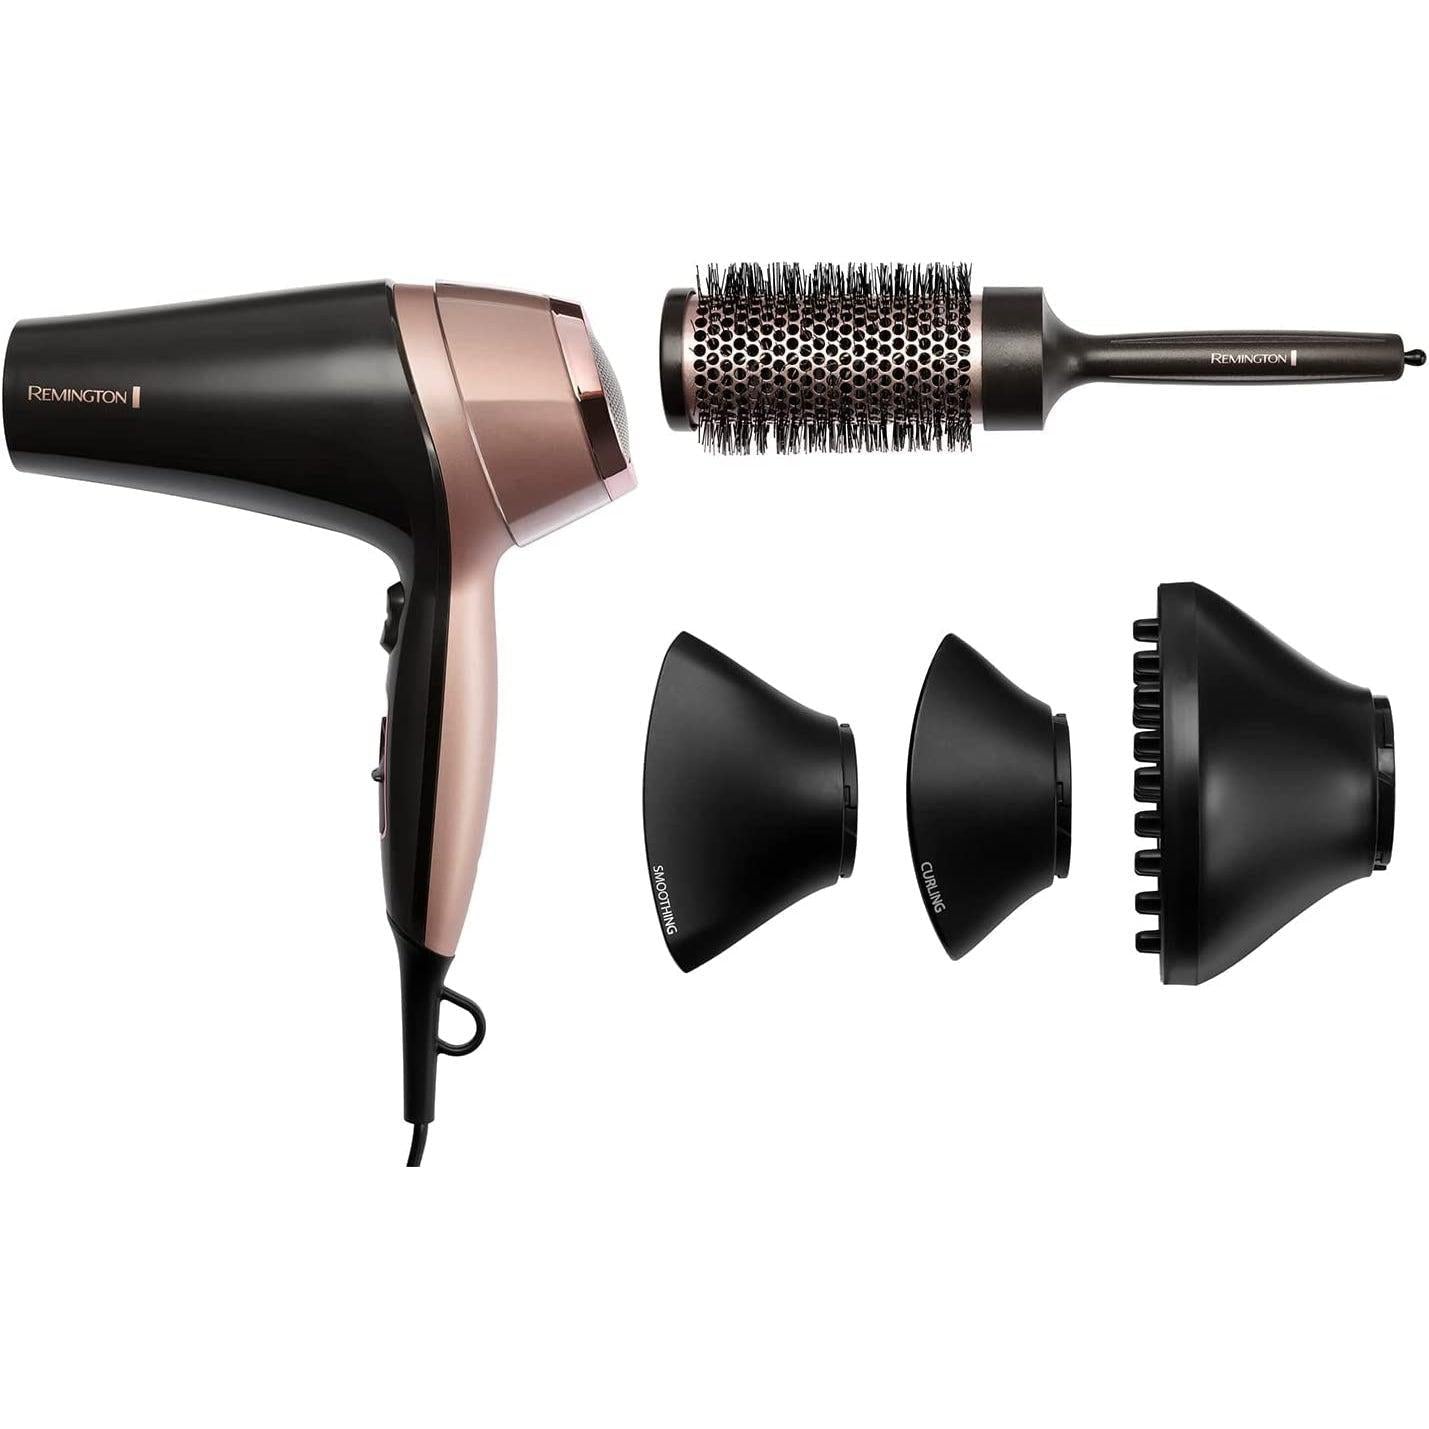 Remington Curl & Straight Hairdryer, Lightweight Ionic Dryer + Diffuser, Curling Nozzle, Smoothing Nozzle & Hair Brush- D5706